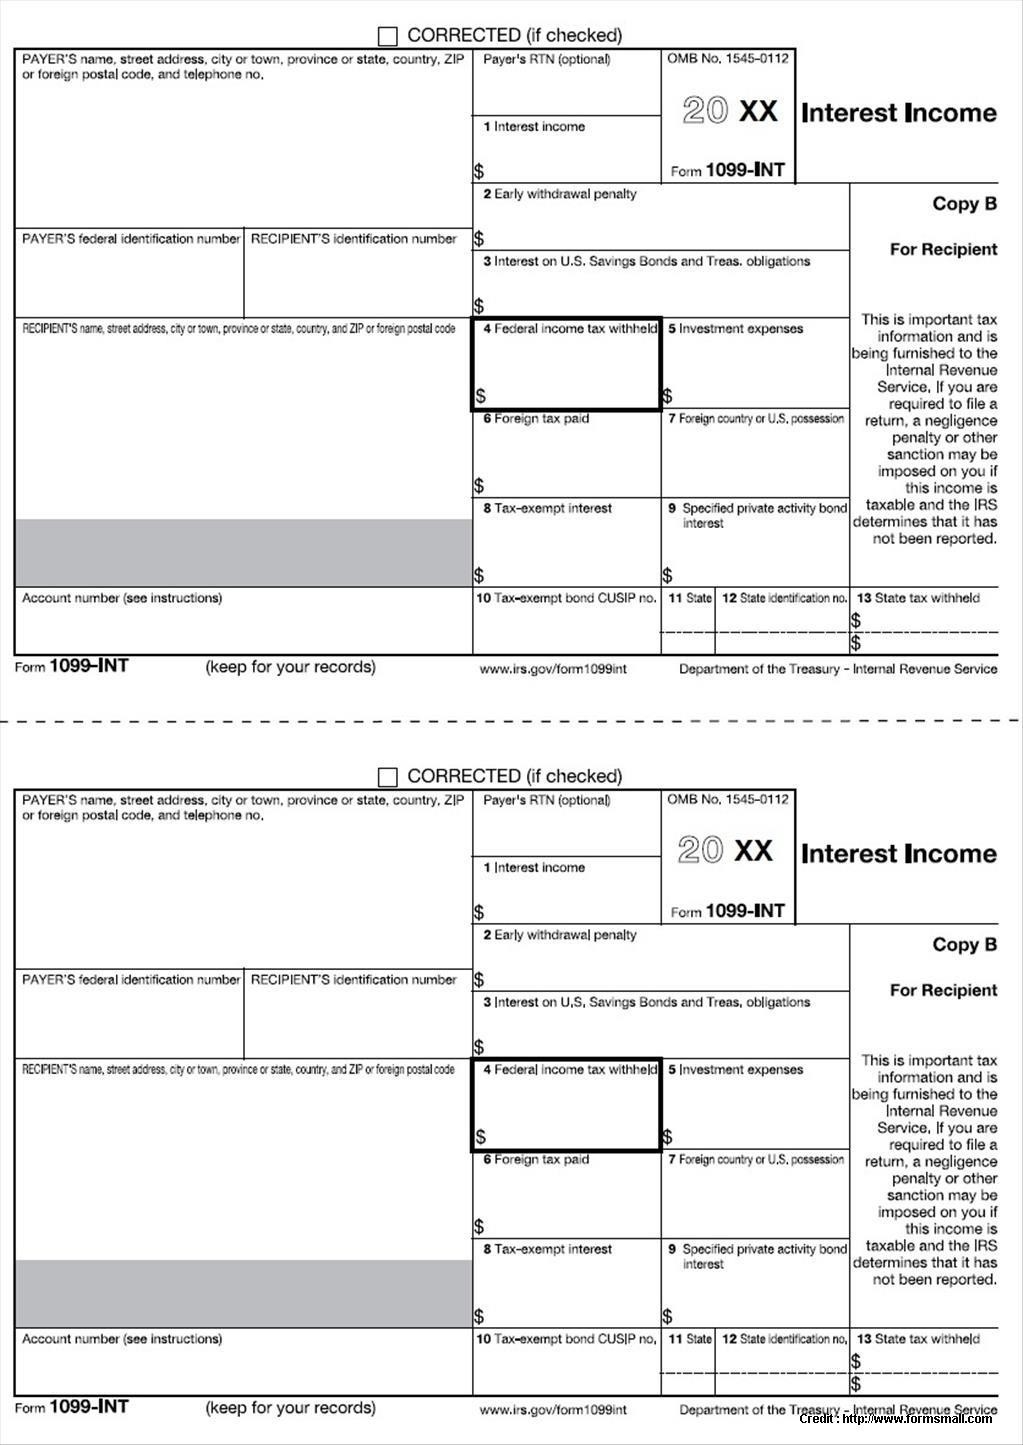 Free 1099 Tax Forms Printable Form 2014 Fillable W2 Photo-Blank Tax Forms Printable